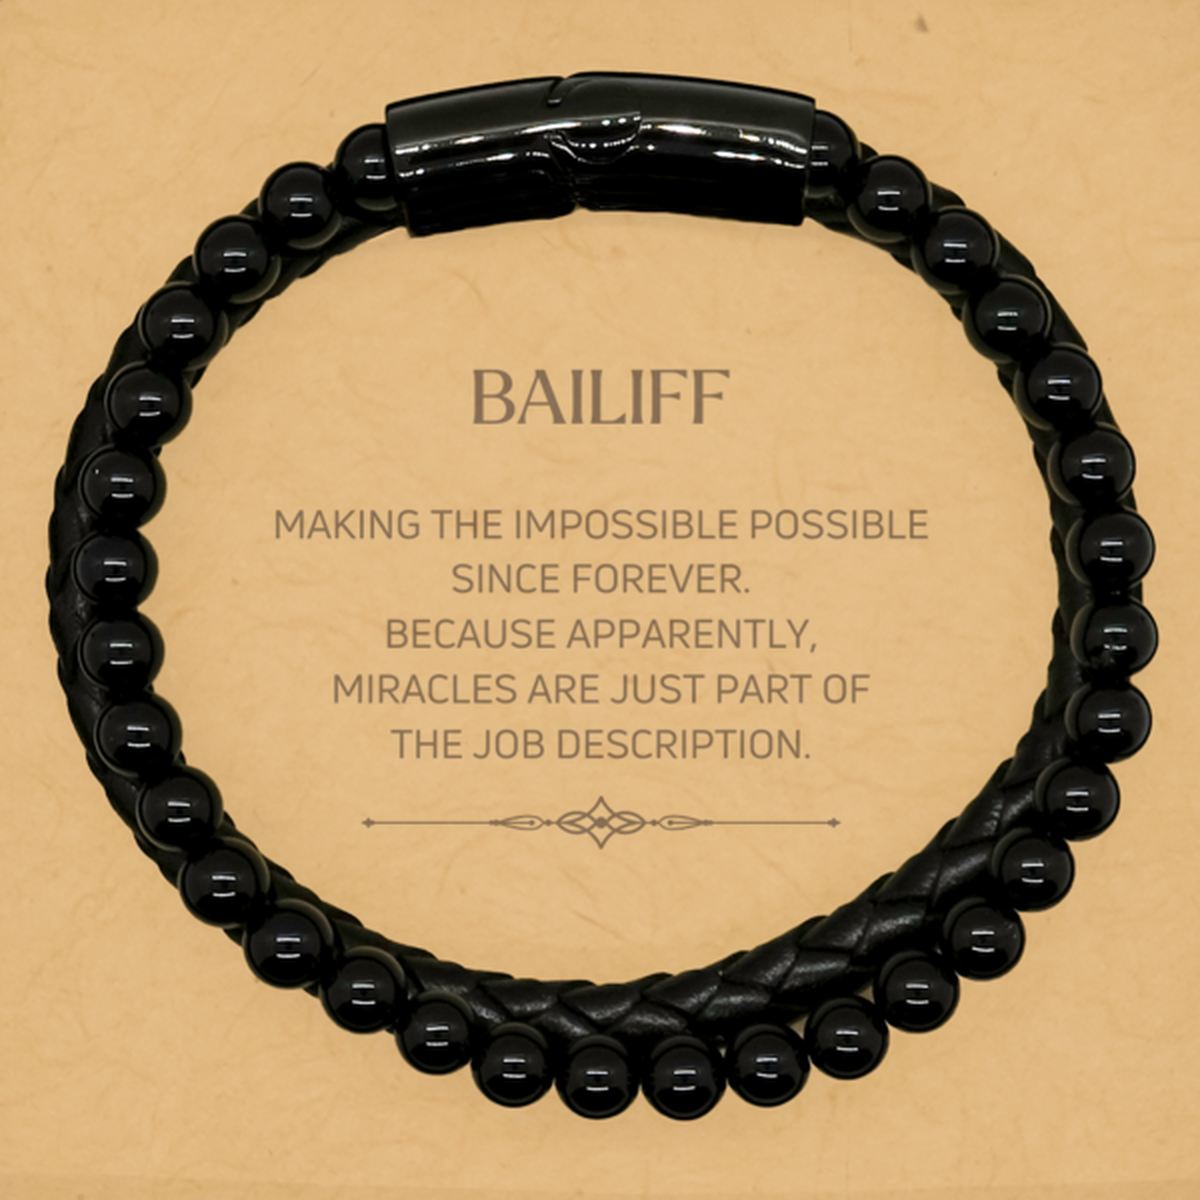 Funny Bailiff Gifts, Miracles are just part of the job description, Inspirational Birthday Stone Leather Bracelets For Bailiff, Men, Women, Coworkers, Friends, Boss